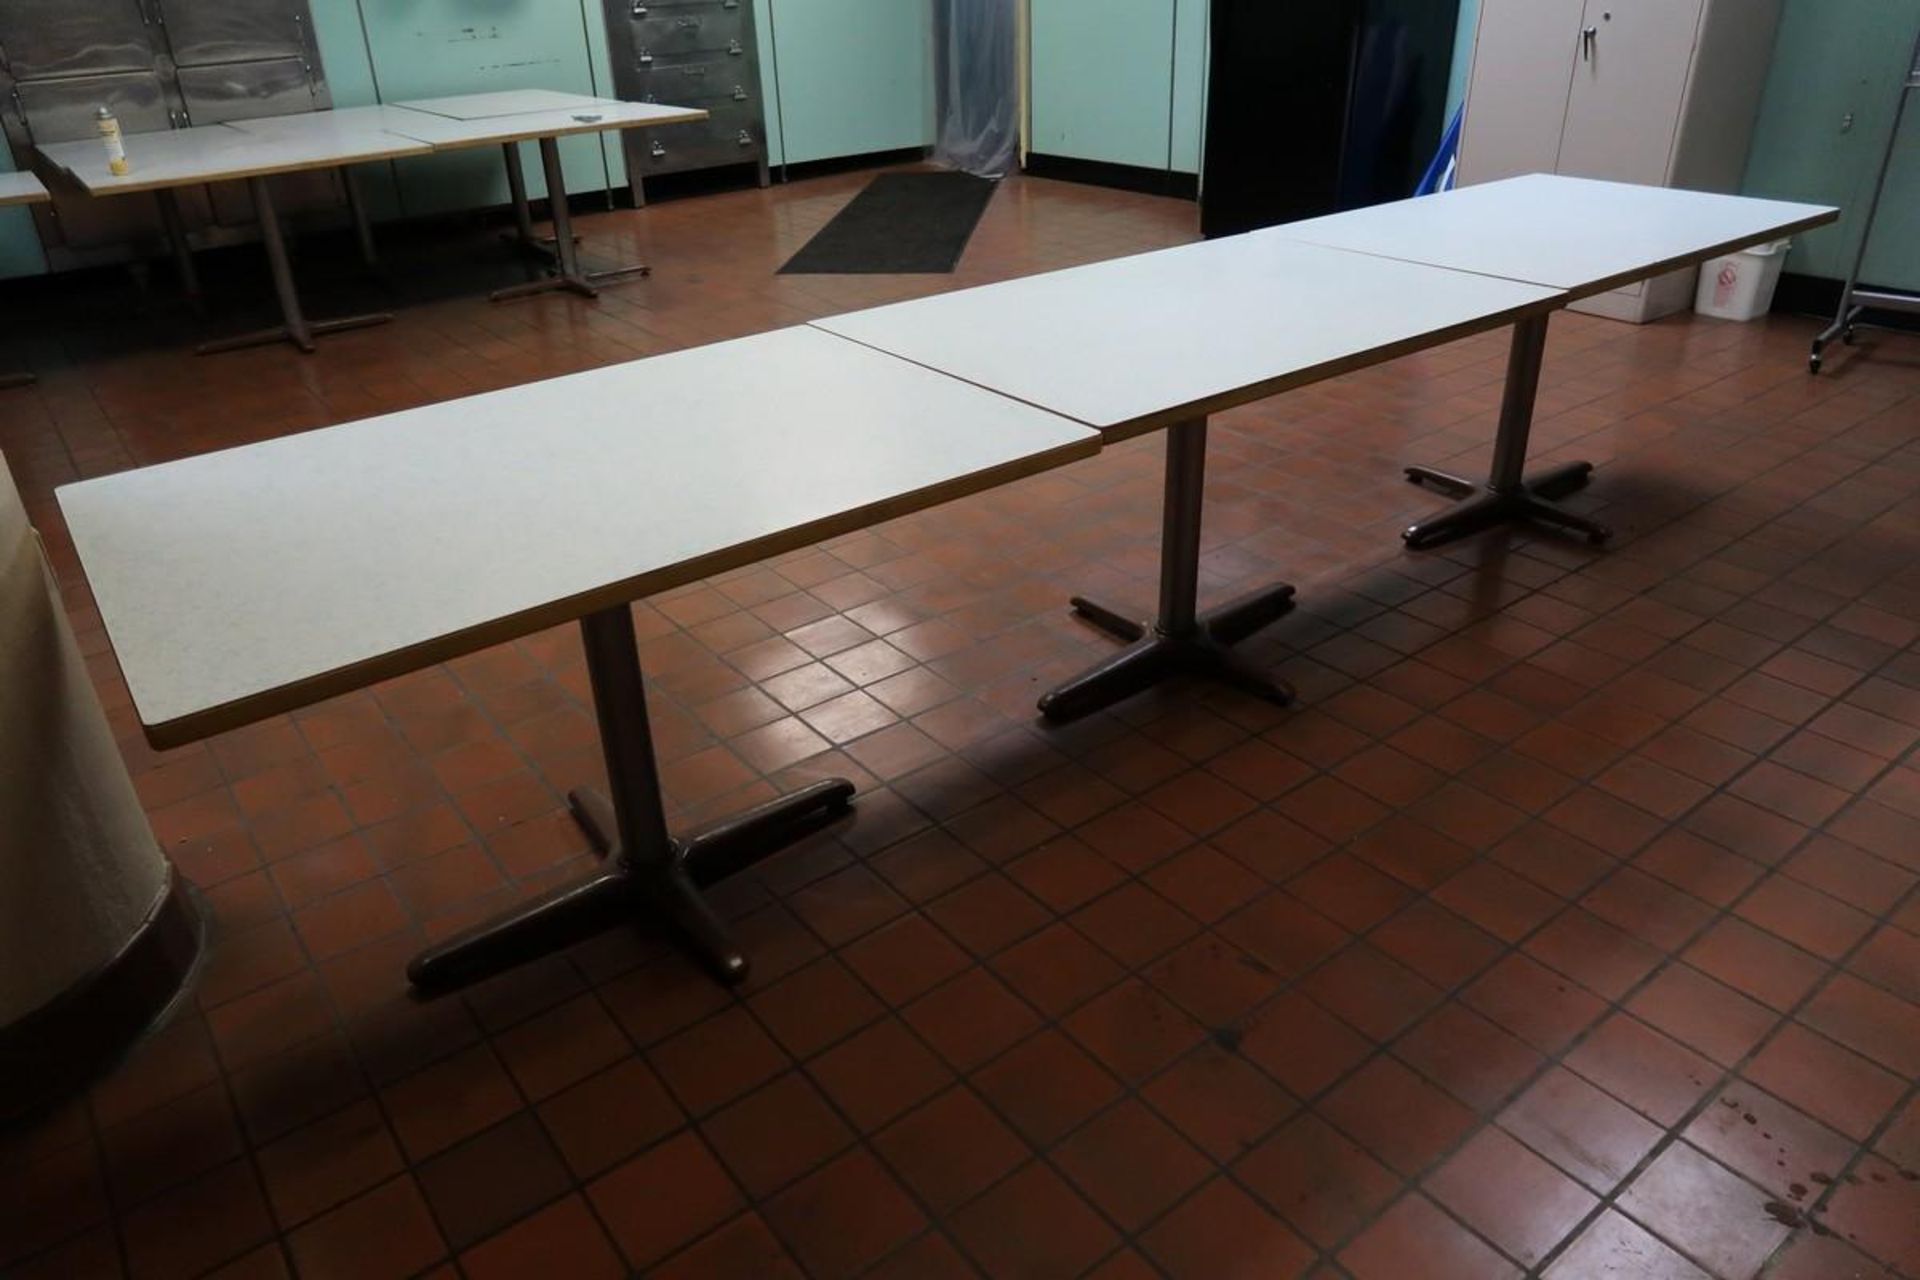 Contents of 3rd Floor Lunch Room - Image 5 of 7